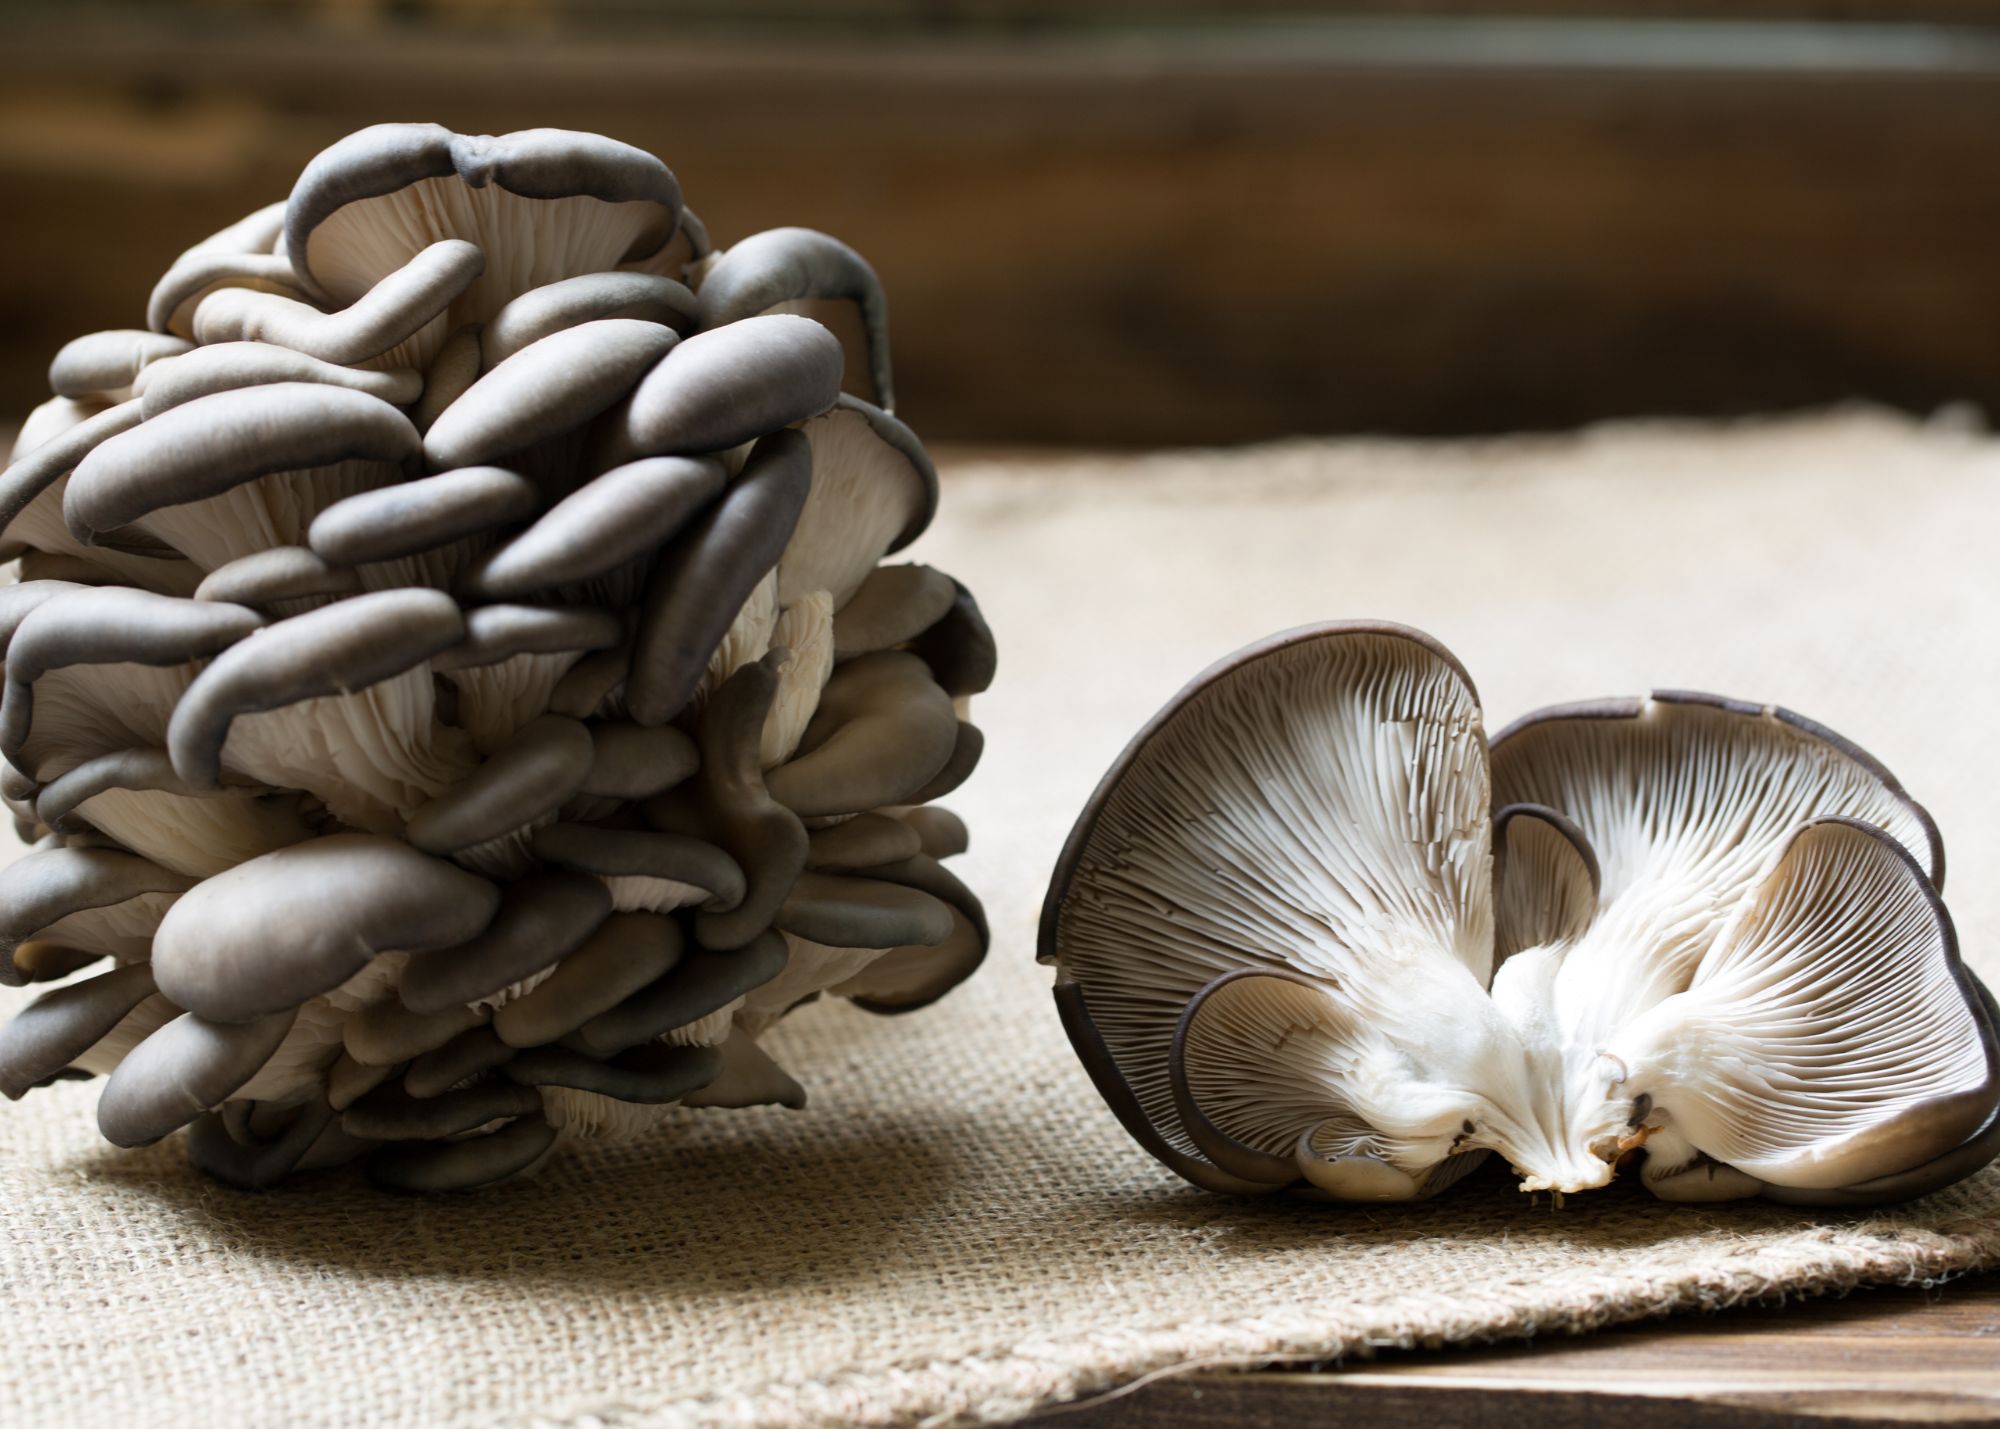 Blue Oyster Mushrooms on a table with a placemat